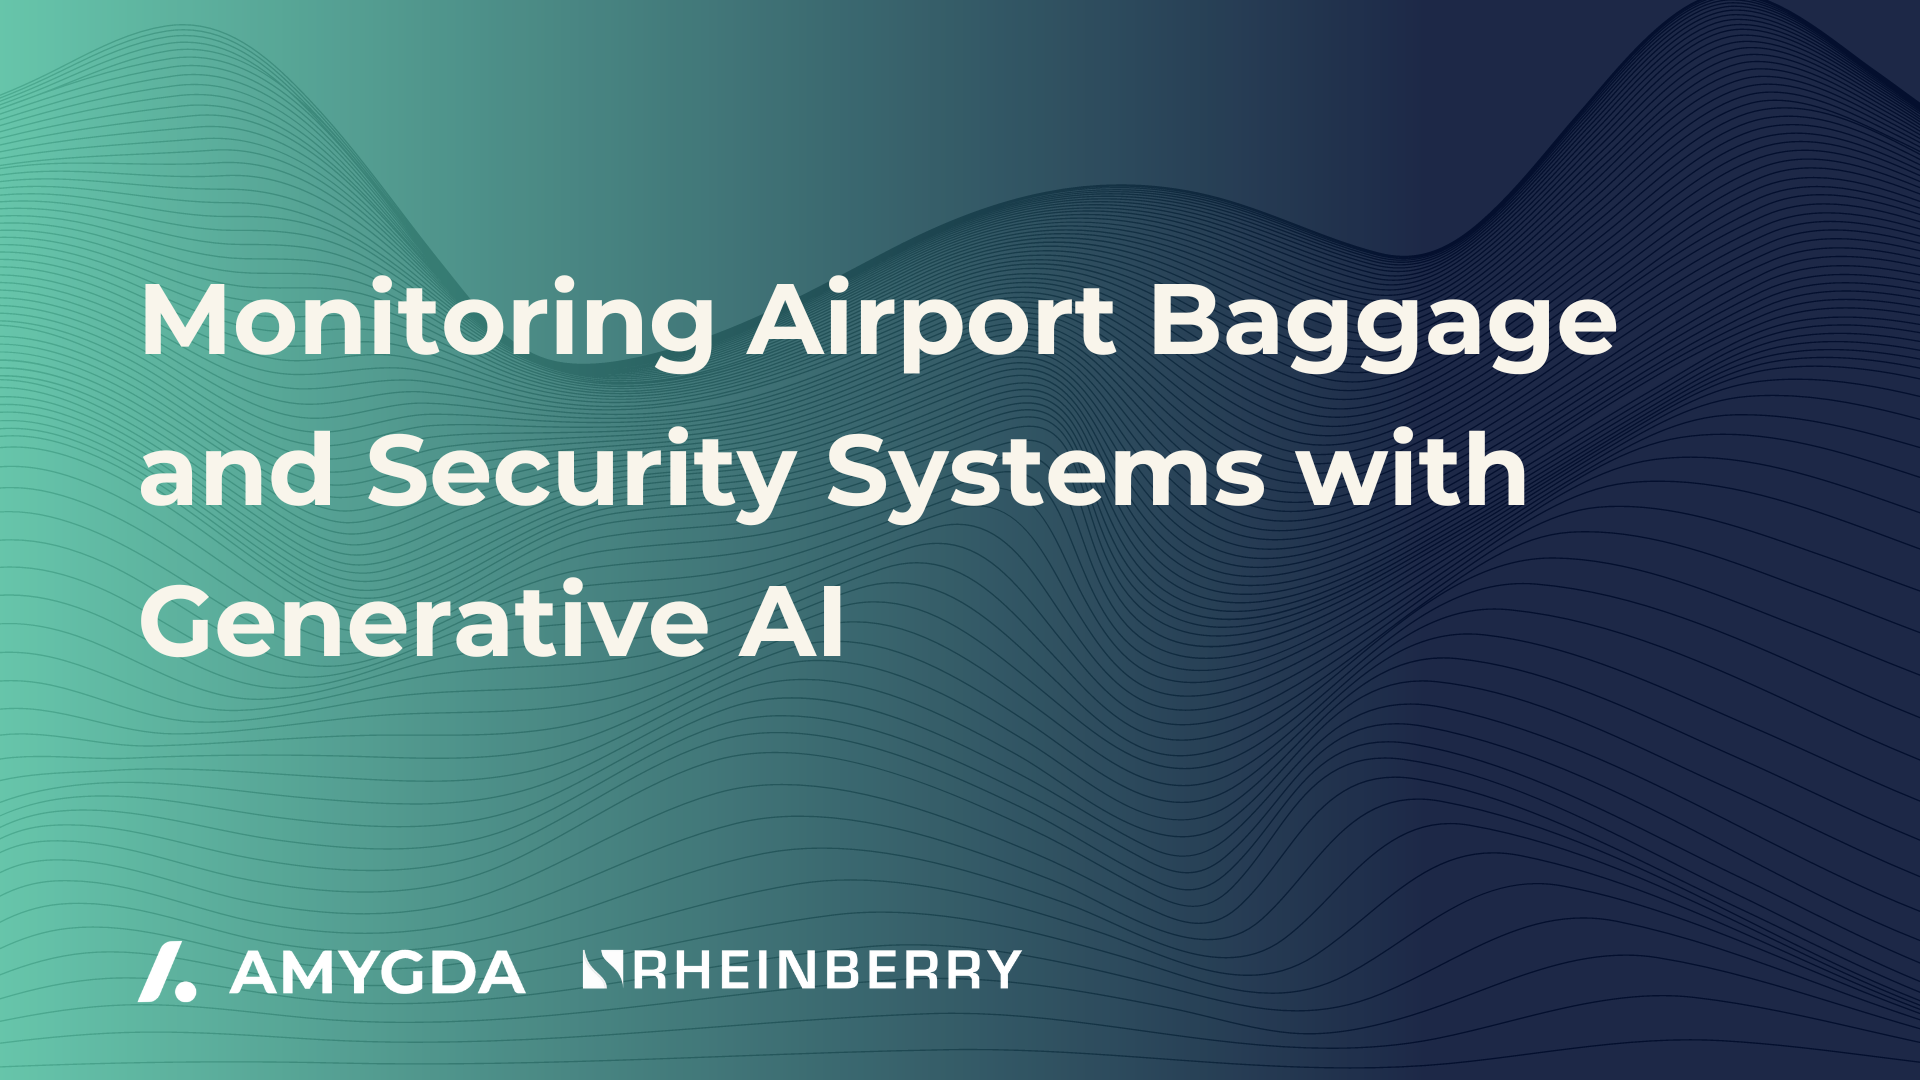 GenAI for Airport Security Systems